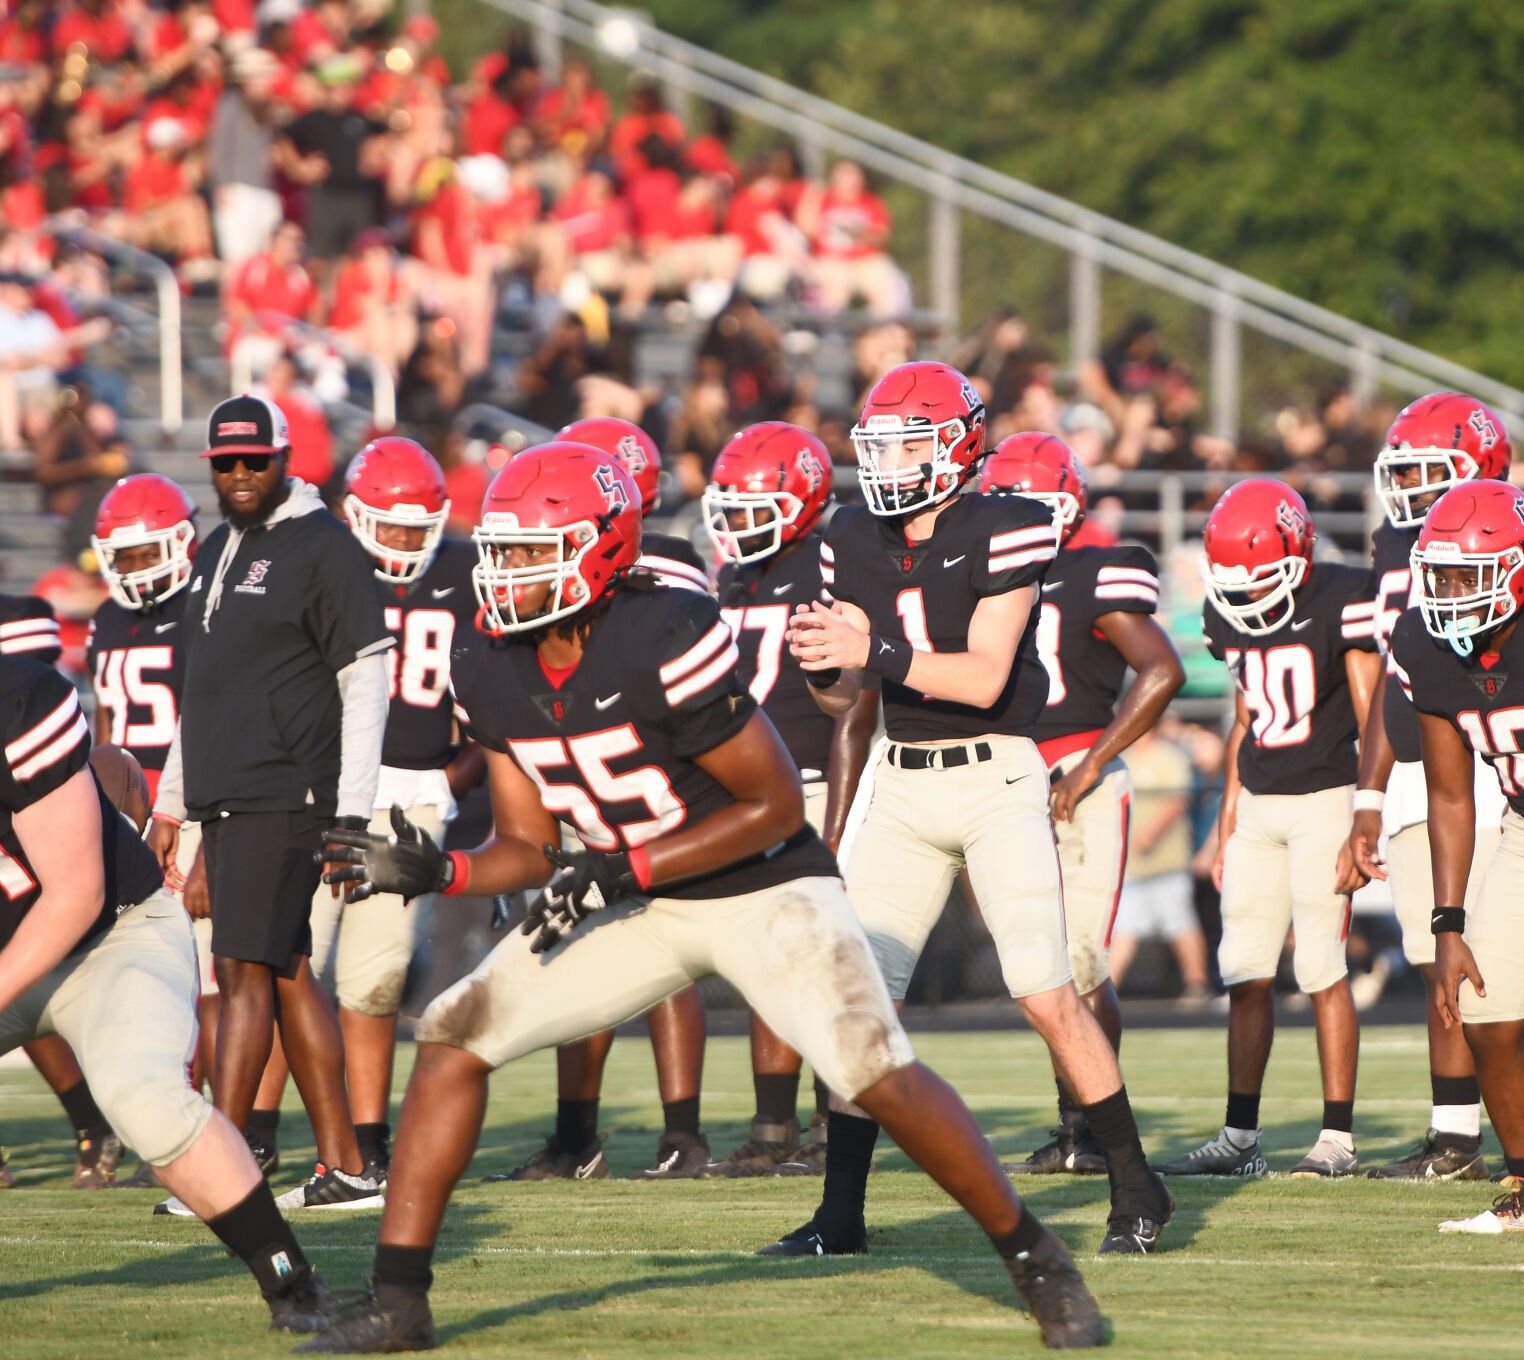 Stratford High School Knights Build Depth and Momentum for Region Title Defense